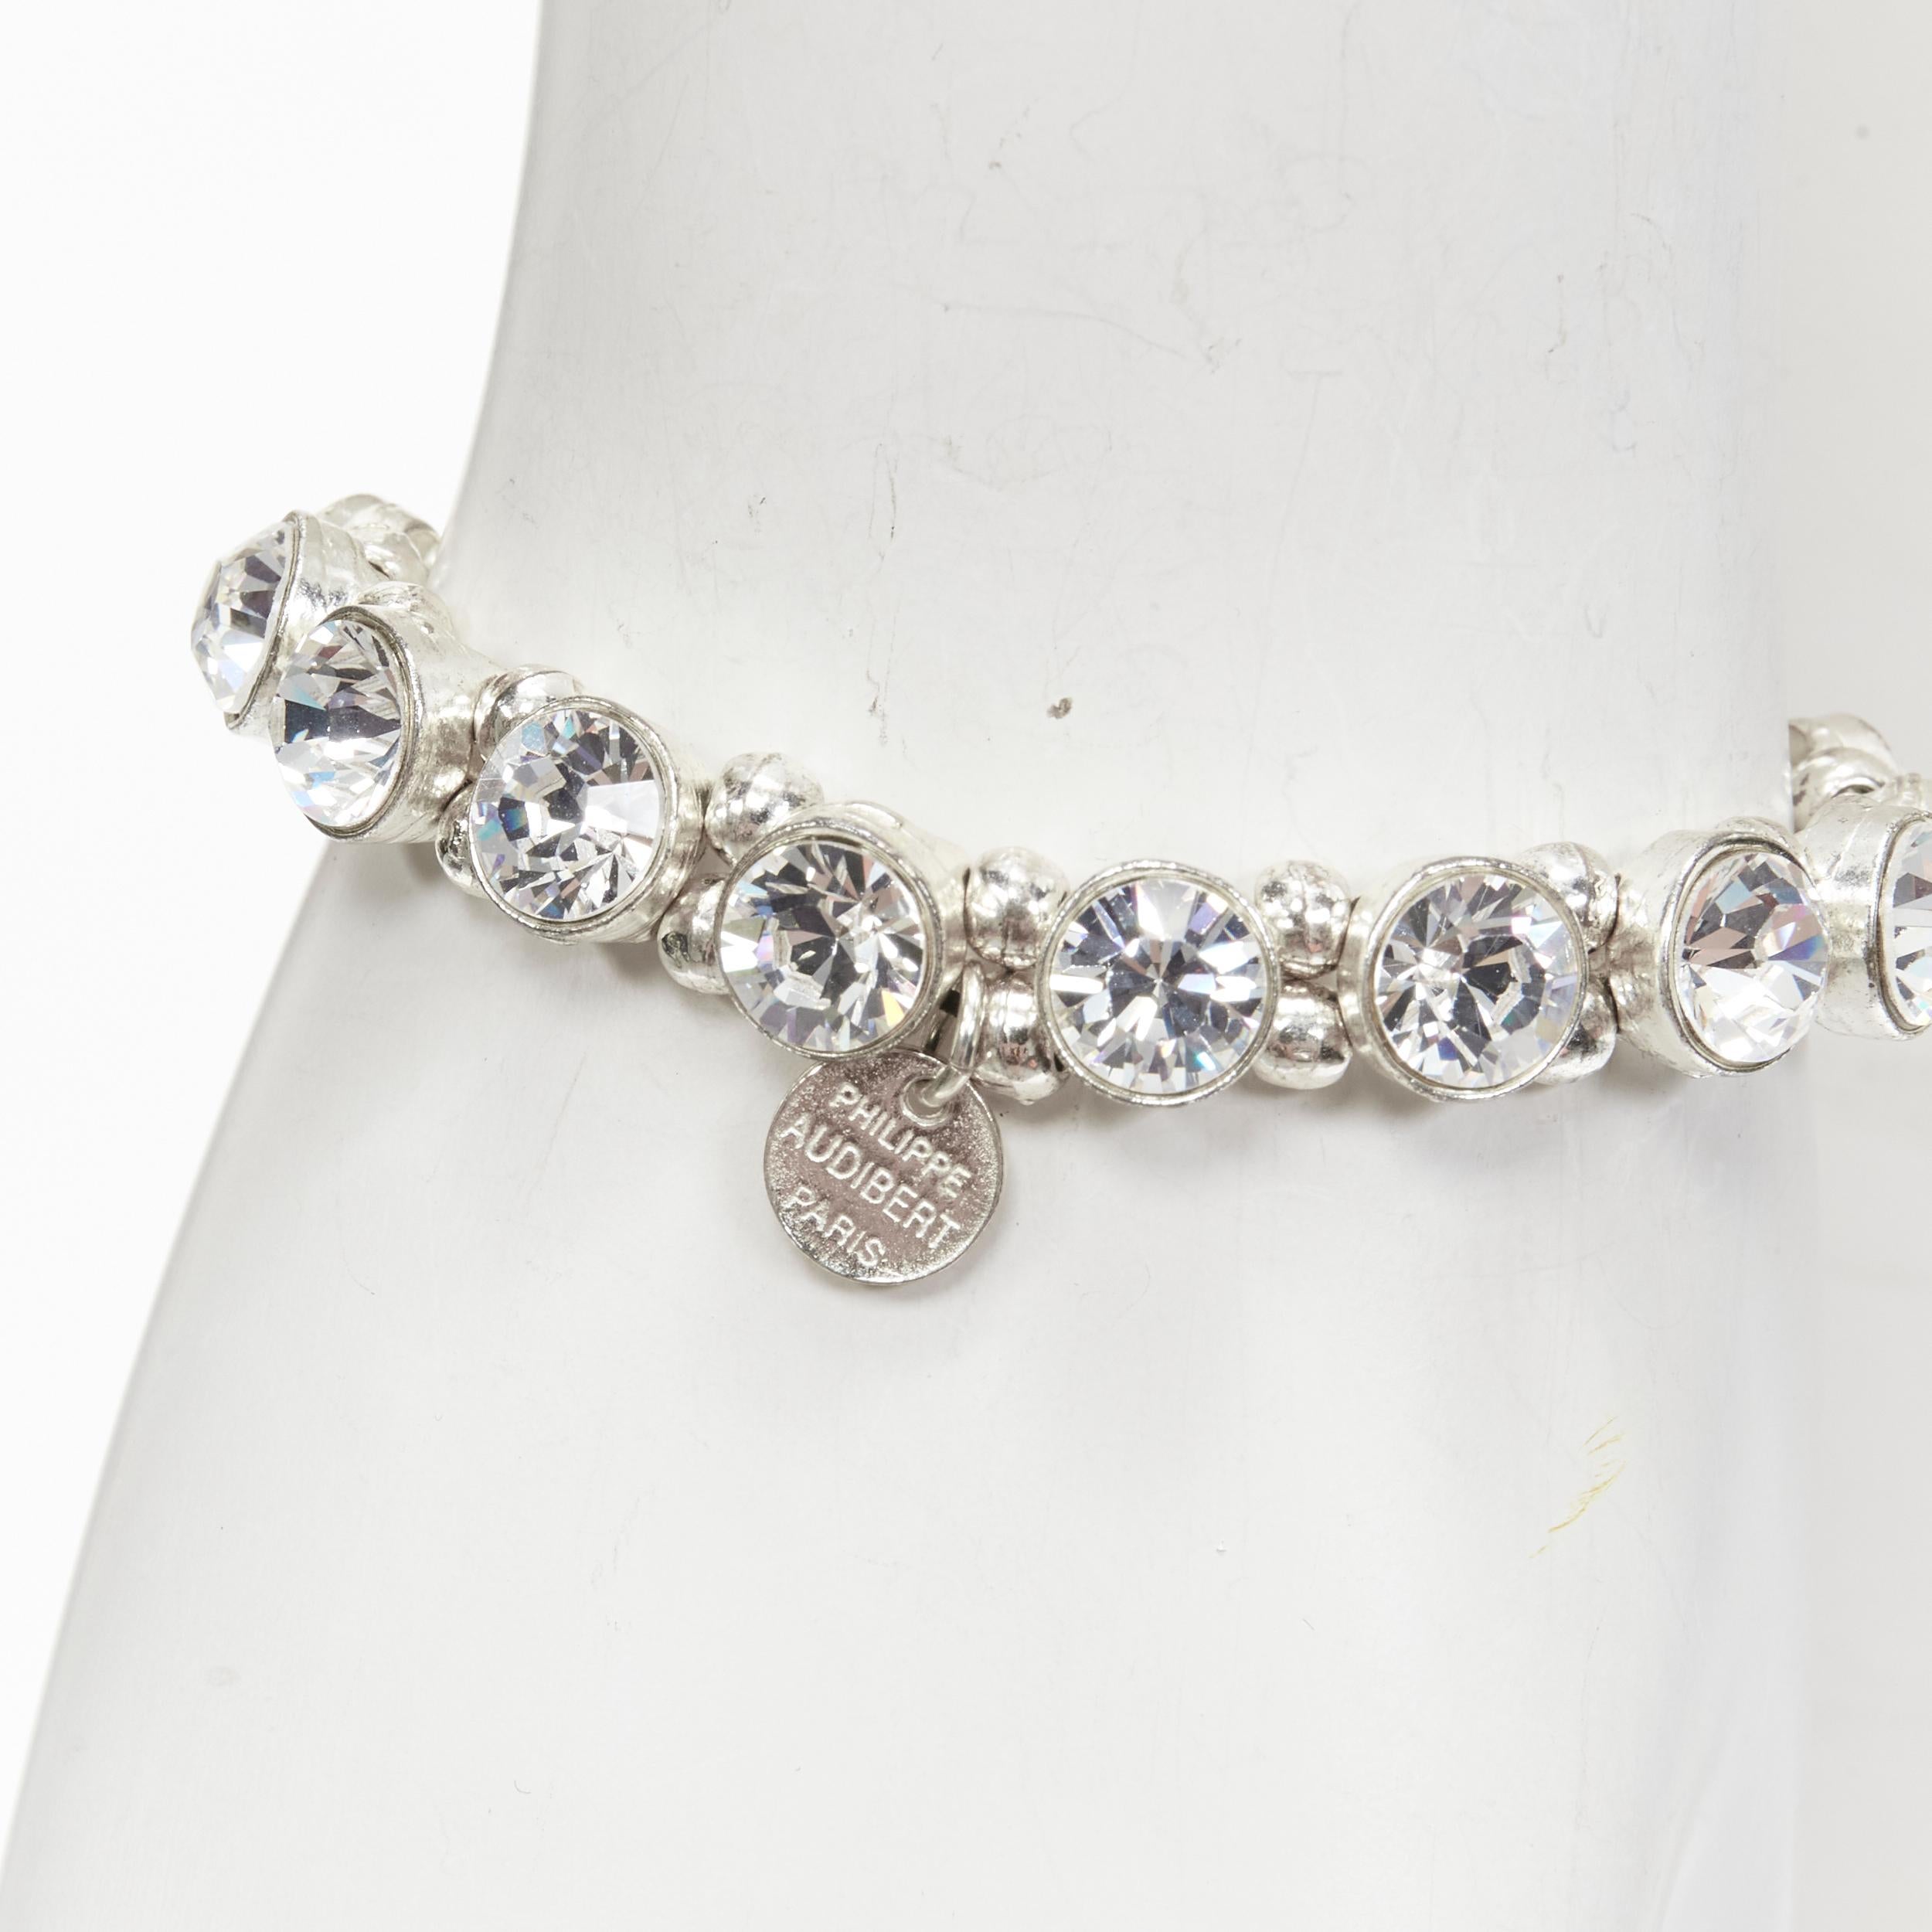 PHILLIPE AUDIBERT silver round crystal beads chain elastic bracelet
Reference: ANWU/A00289
Brand: Phillipe Audibert
Material: Metal
Color: Silver
Closure: Elasticated
Extra Details: Brand name logo plate.

CONDITION:
Condition: Very good, this item